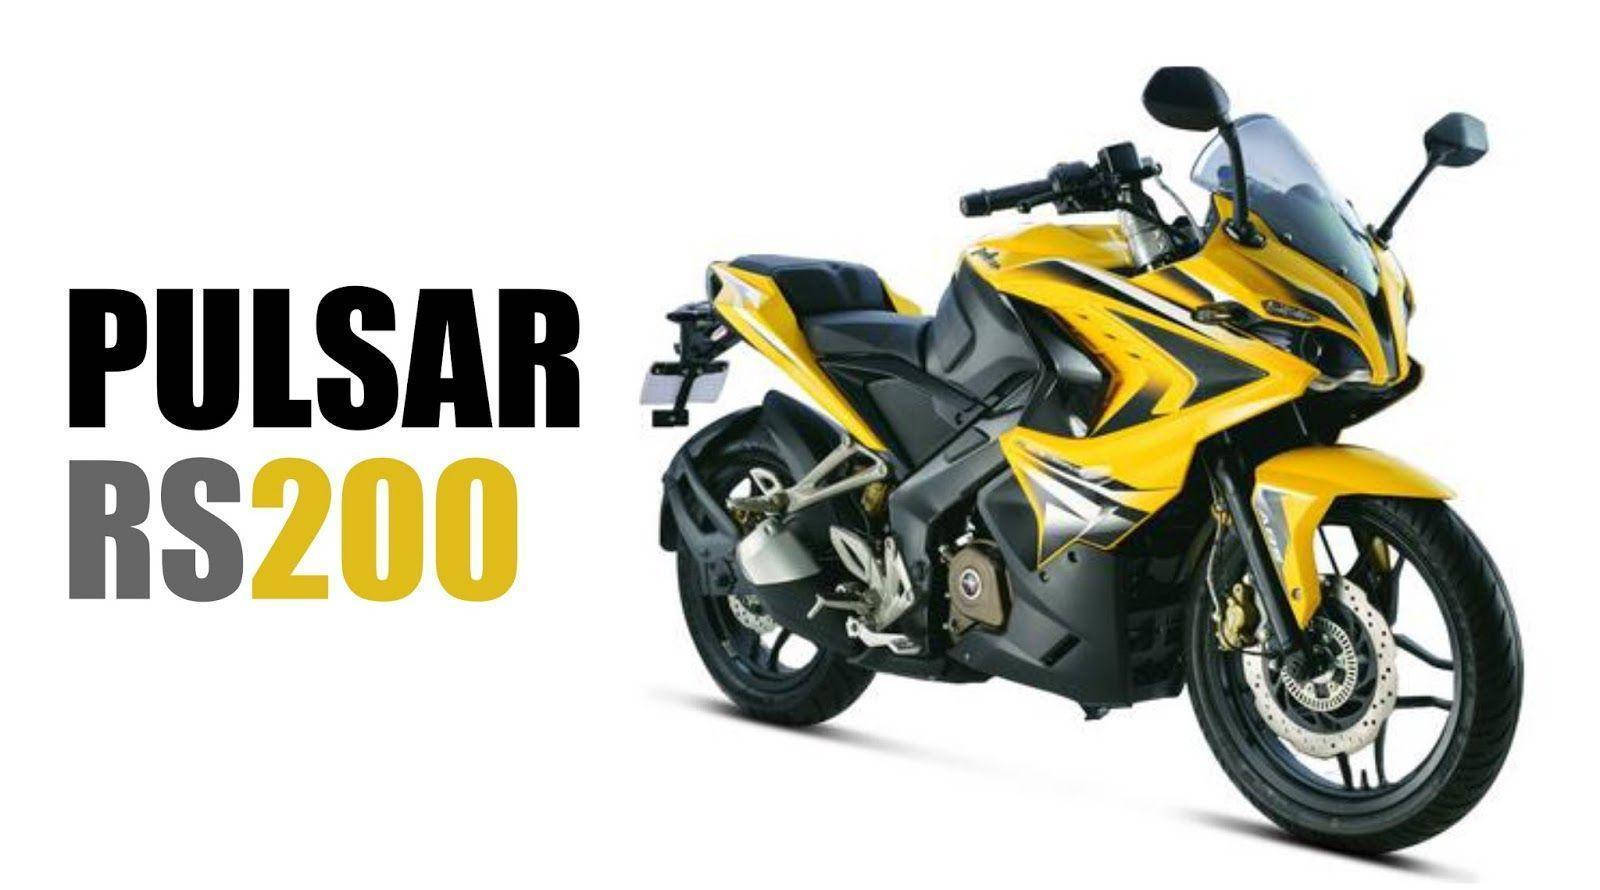 Free Pulsar Rs200 Wallpaper Downloads, [100+] Pulsar Rs200 Wallpapers for  FREE 